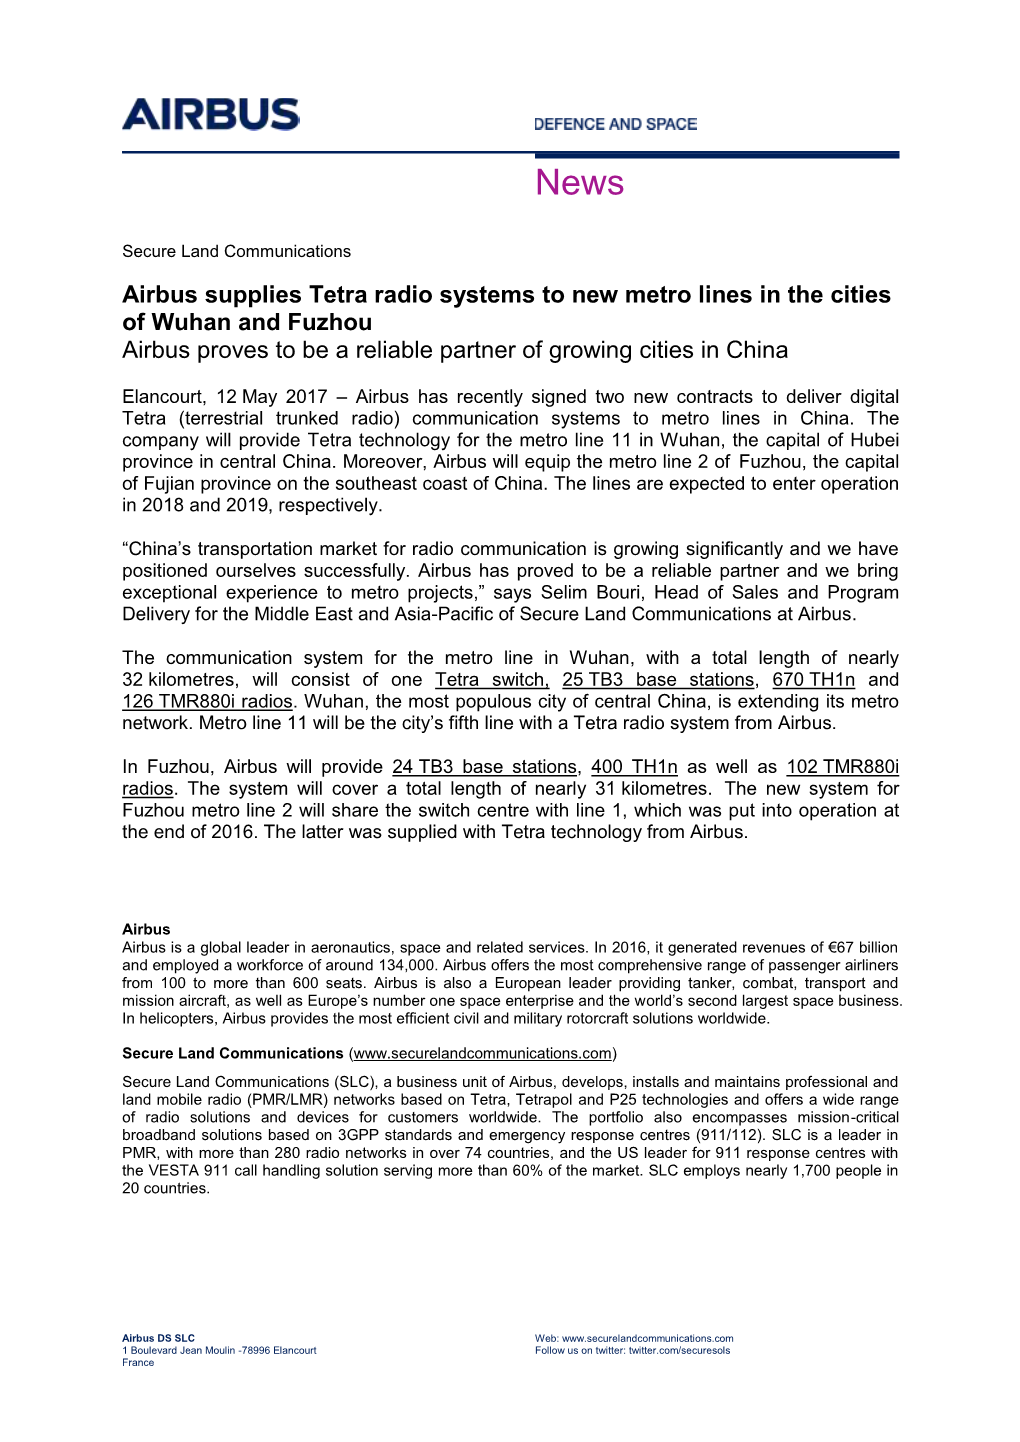 Airbus Supplies Tetra Radio Systems to New Metro Lines in the Cities of Wuhan and Fuzhou Airbus Proves to Be a Reliable Partner of Growing Cities in China